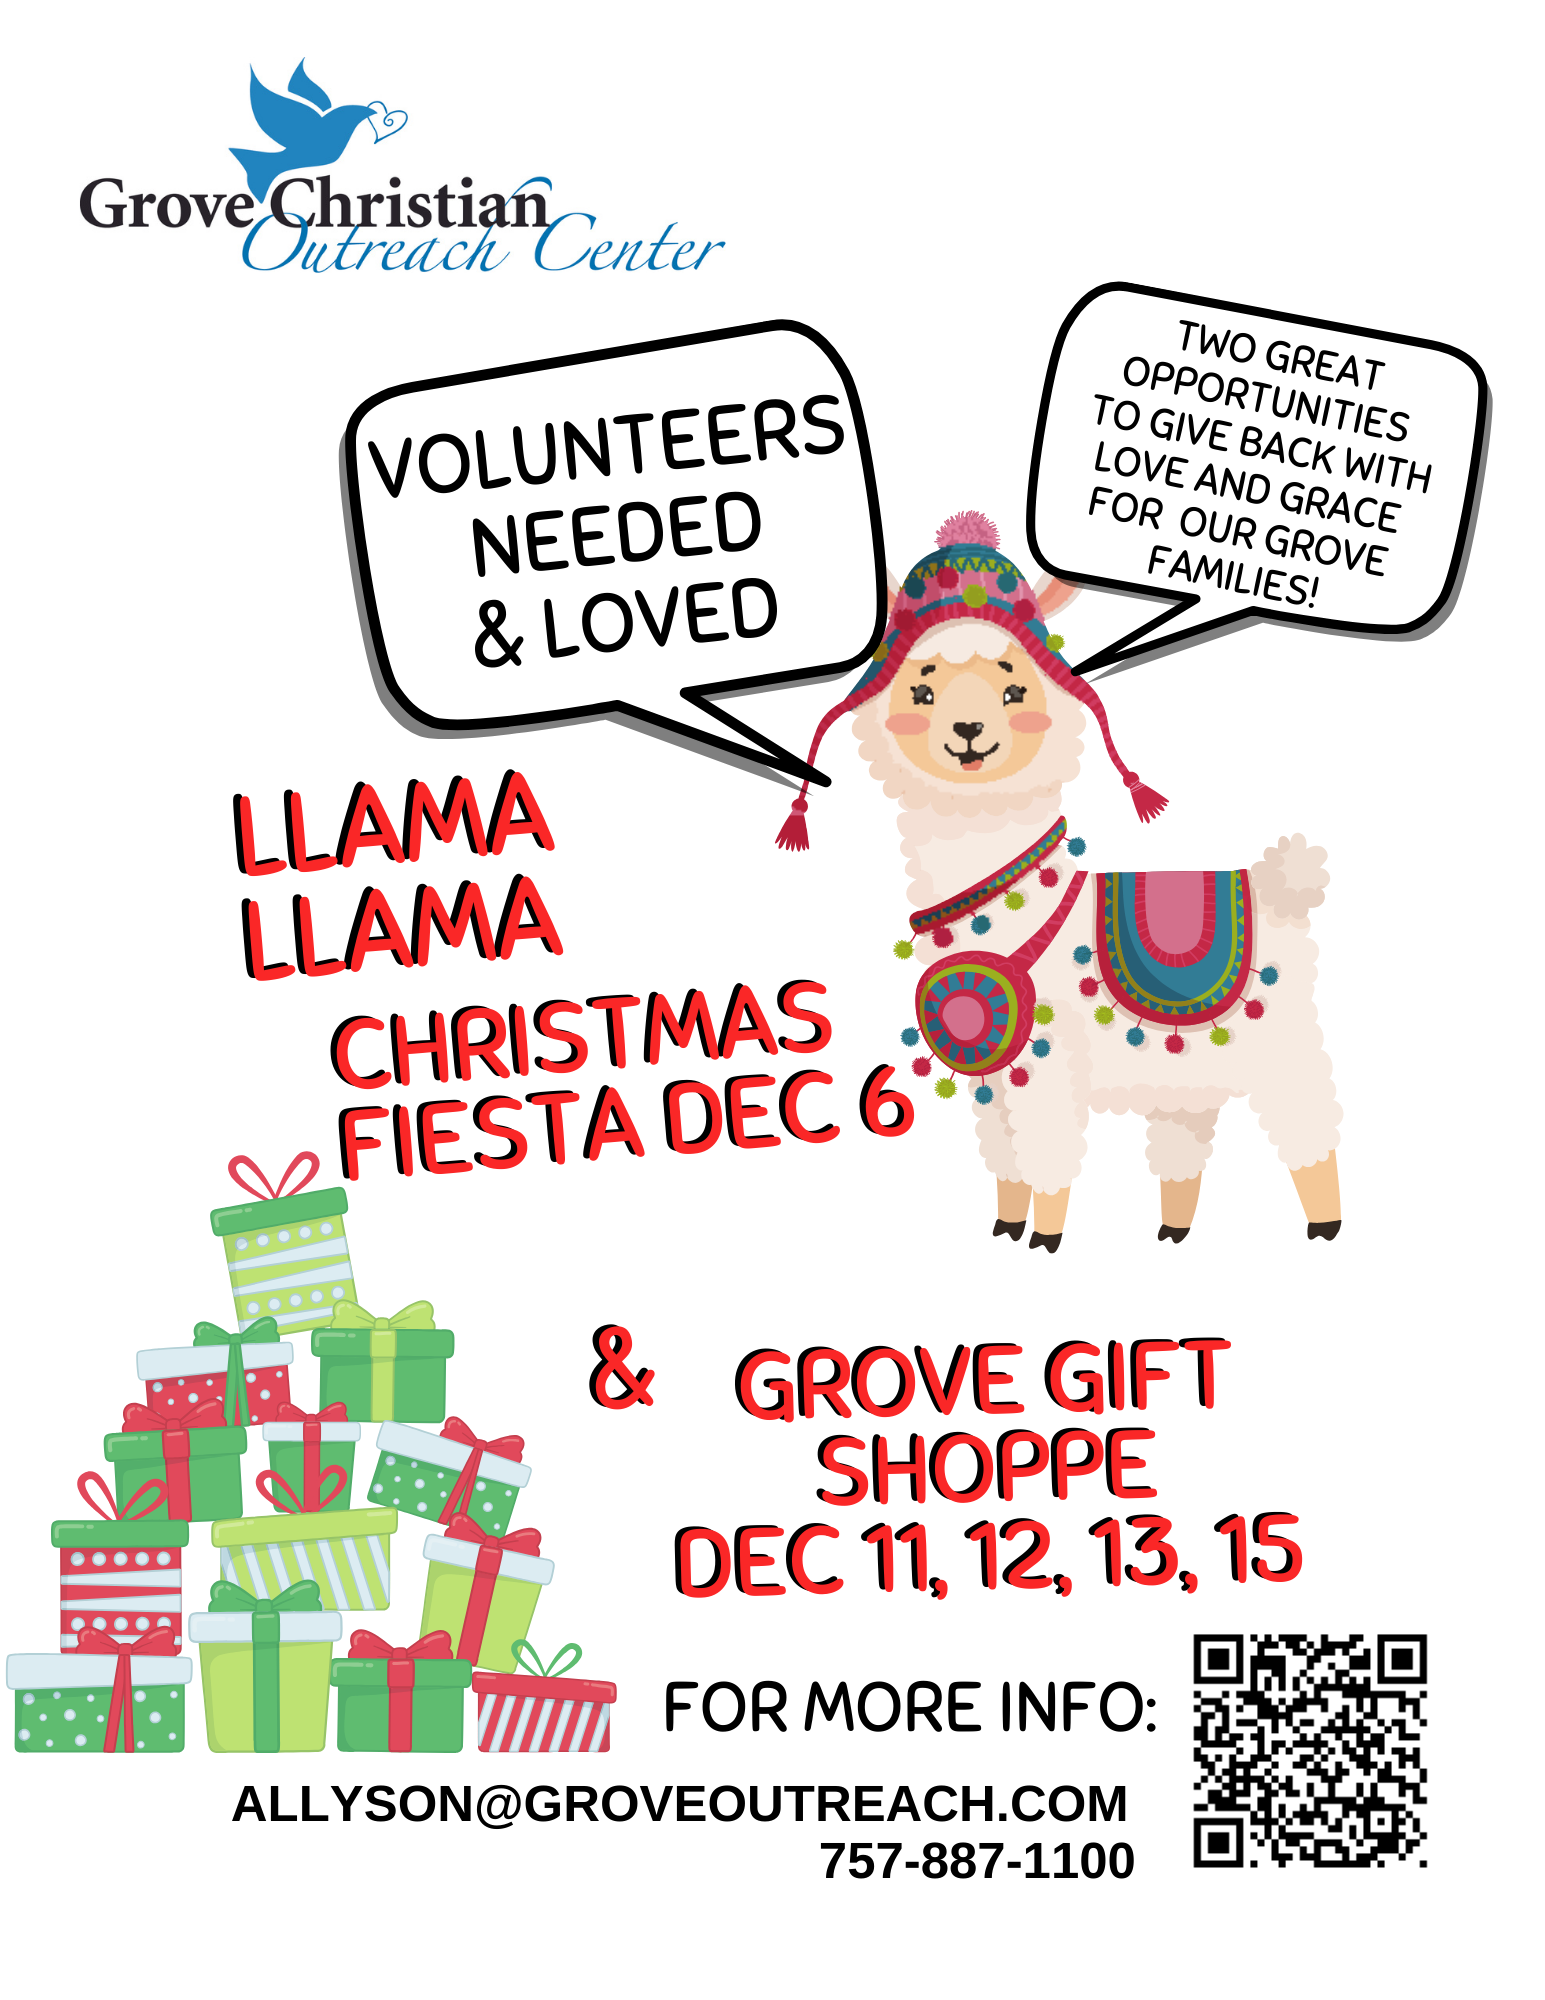 Grove Gift Shoppe & More Volunteer Opportunities starting NOW through Dec 15